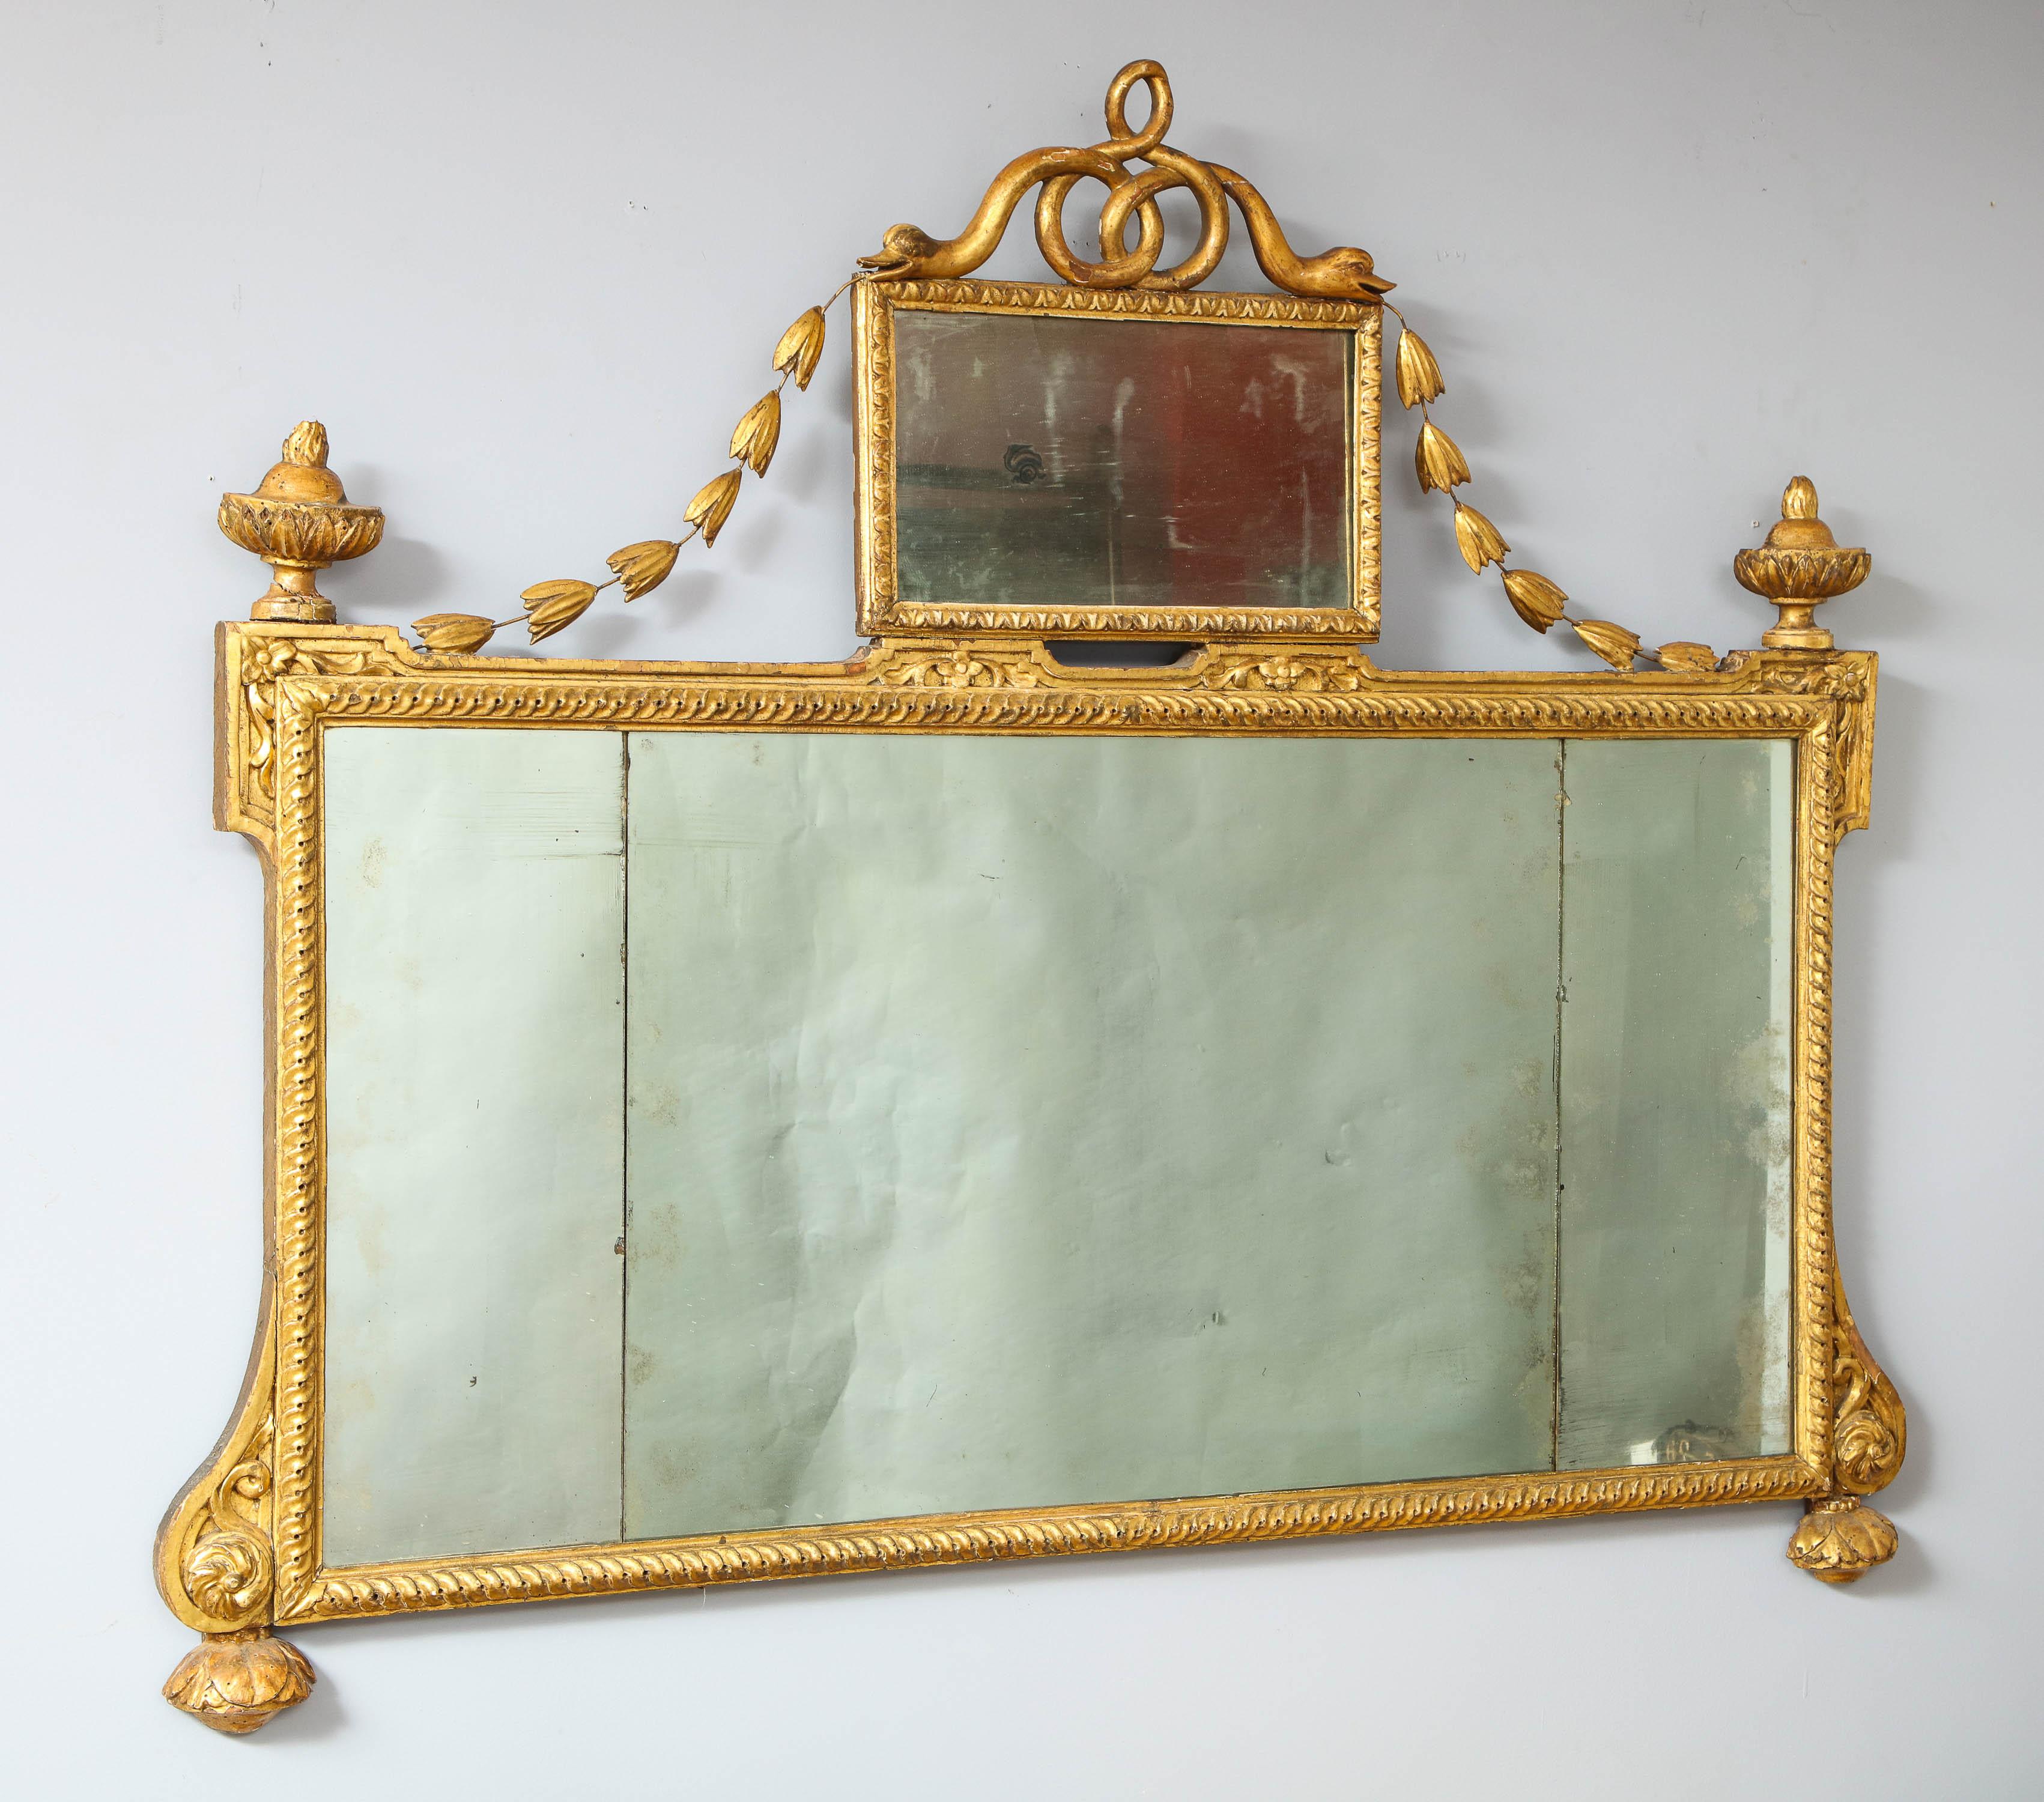 Fine 18th century Italian giltwood overmantle mirror, the crest with entwined serpents over center mirrored tablet with bell flower swags draping to urn finials, the triple mercury plate center with guilloche carved frame, scroll and foliate carved